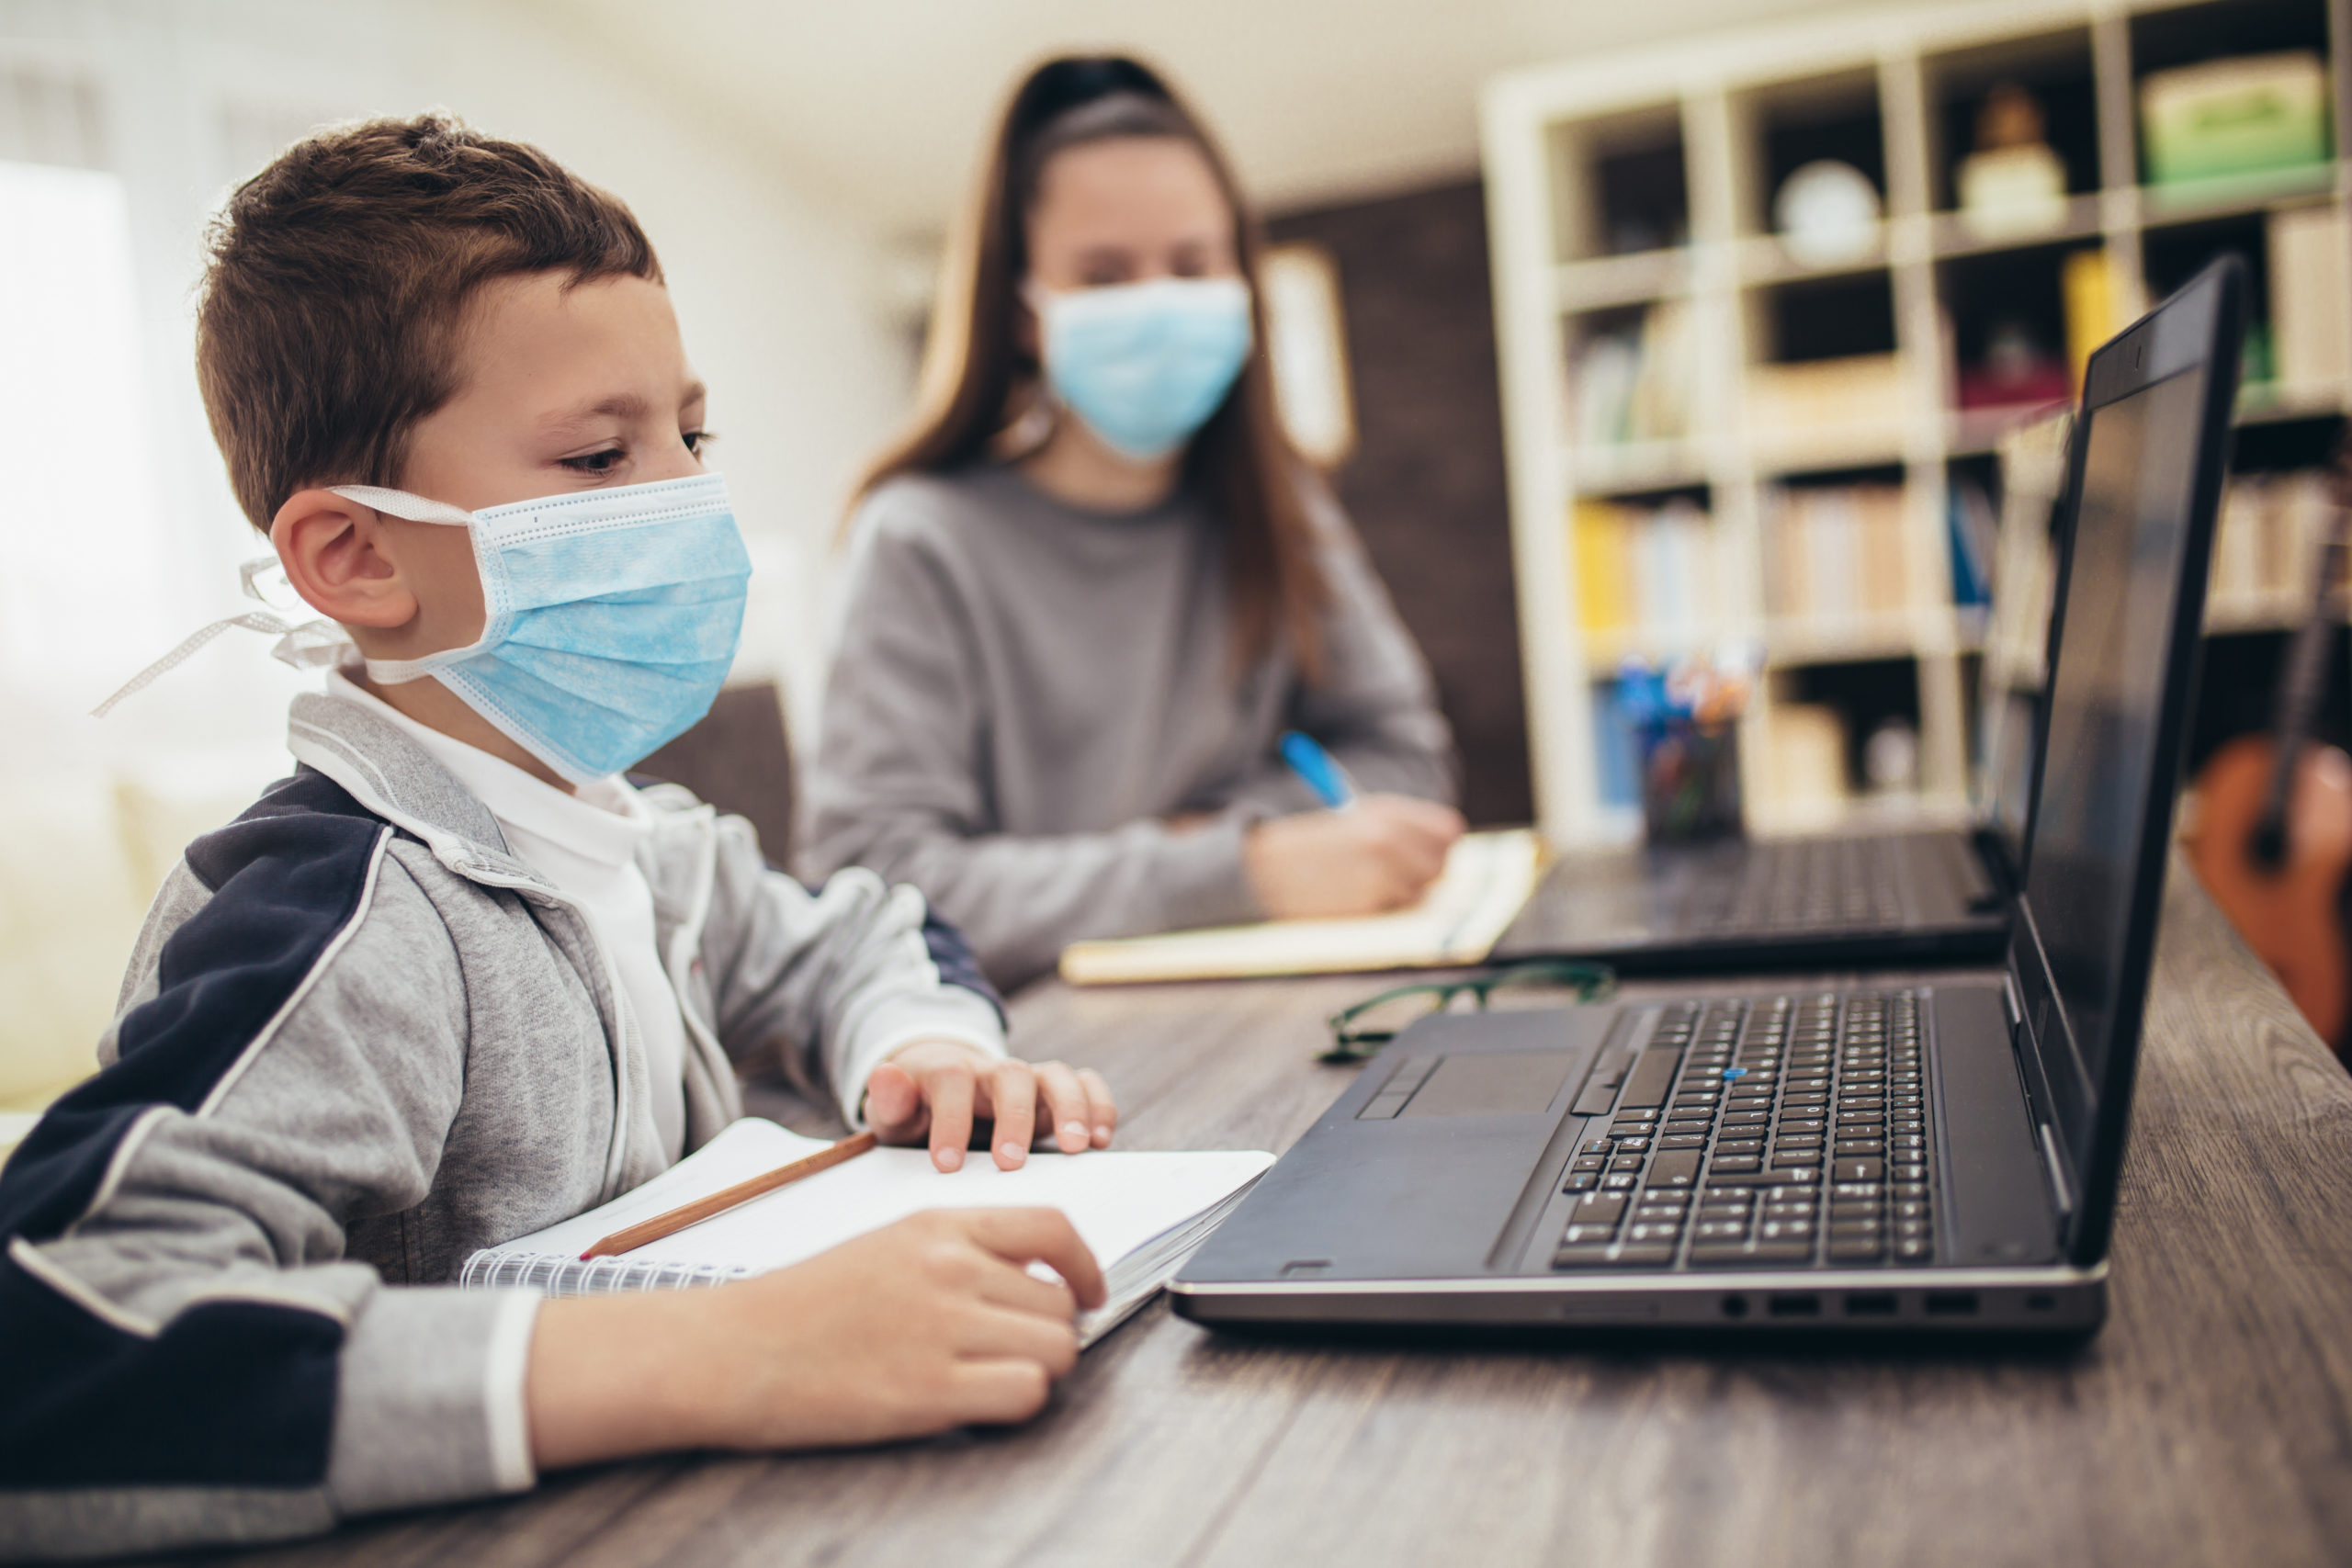 Boy and girl studies at home, wear protective masks, and doing school homework. Distance learning online education.